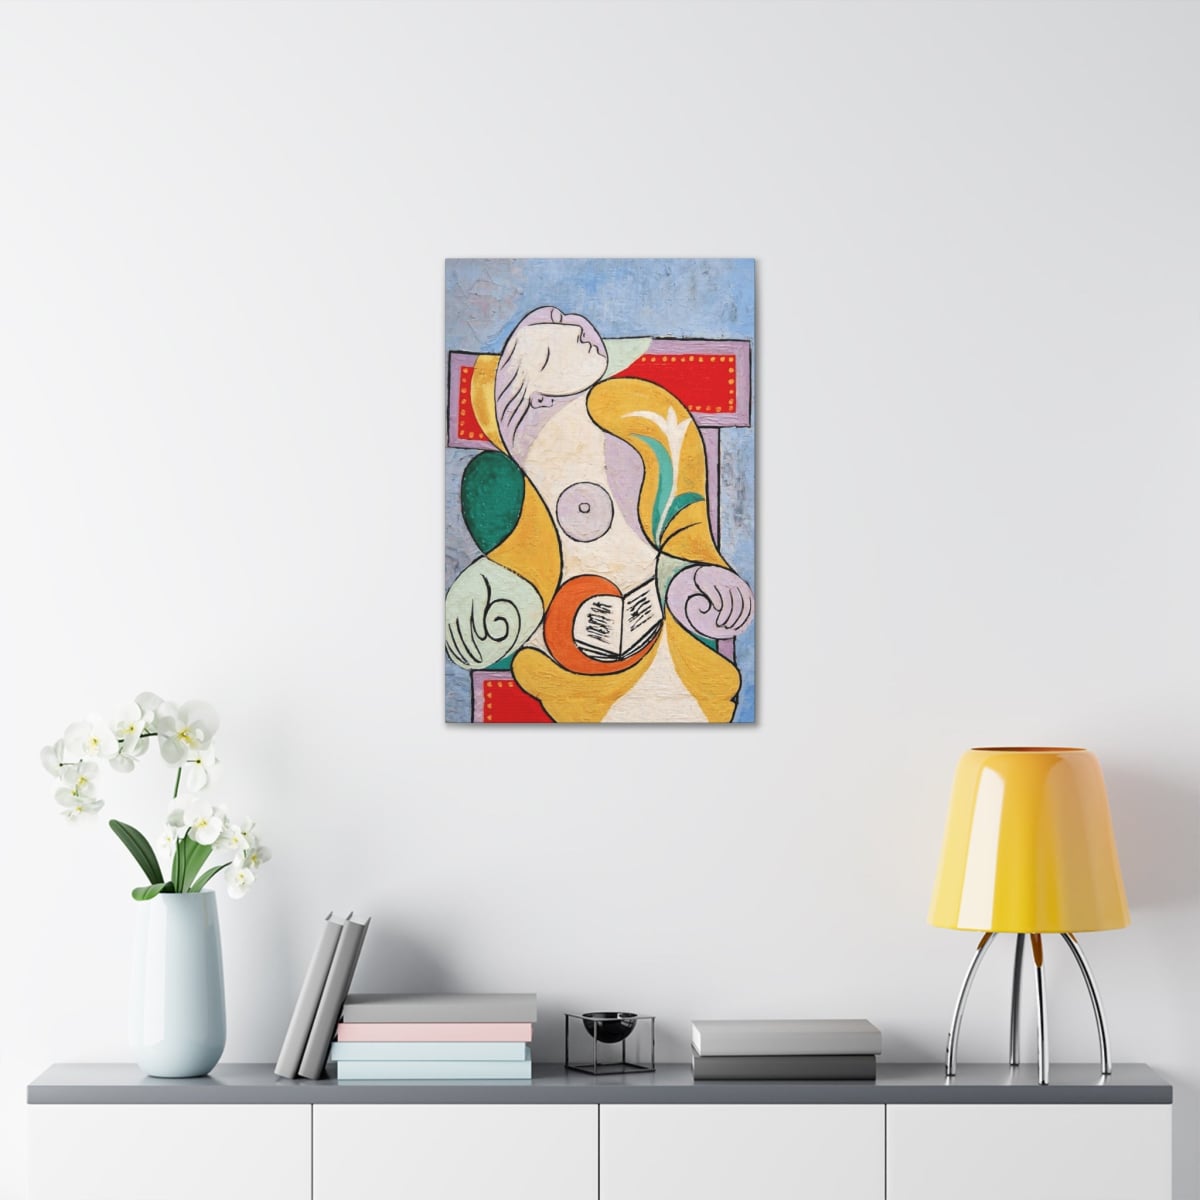 Unique Wall Hanging - Picasso Art